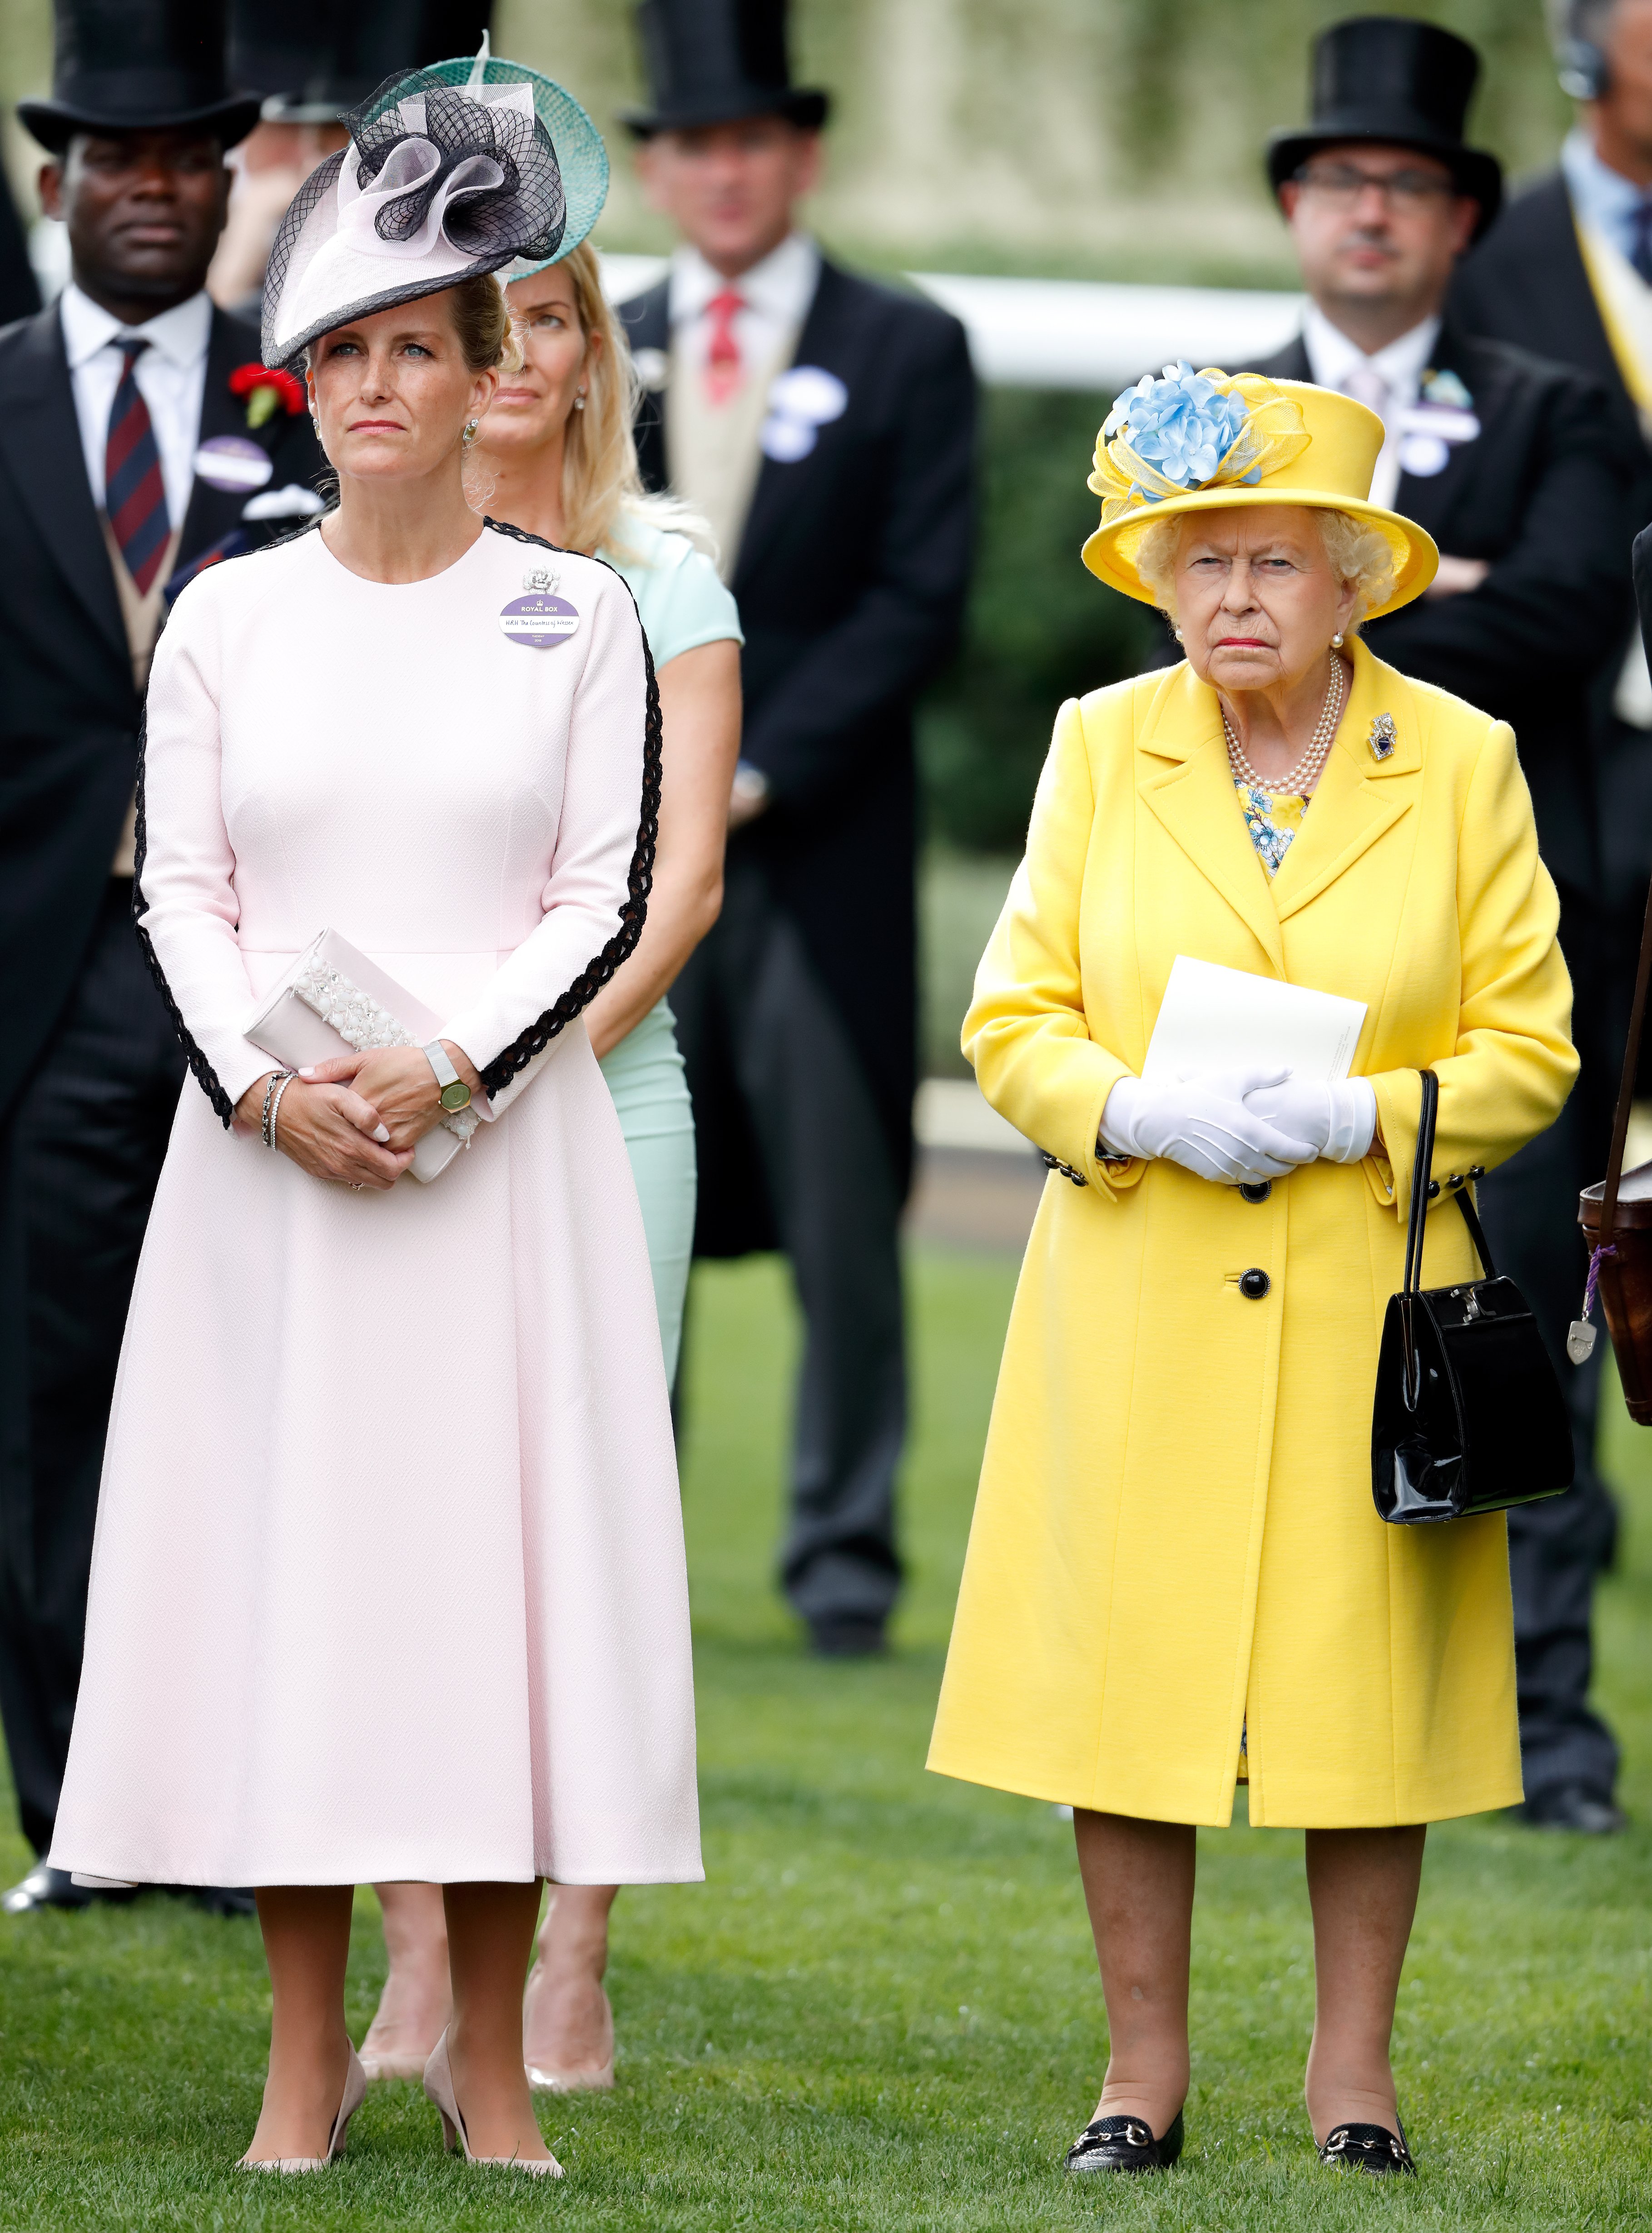 Queen Elizabeth and Sophie Wessex in Ascot, England in 2018. | Source: Getty Images